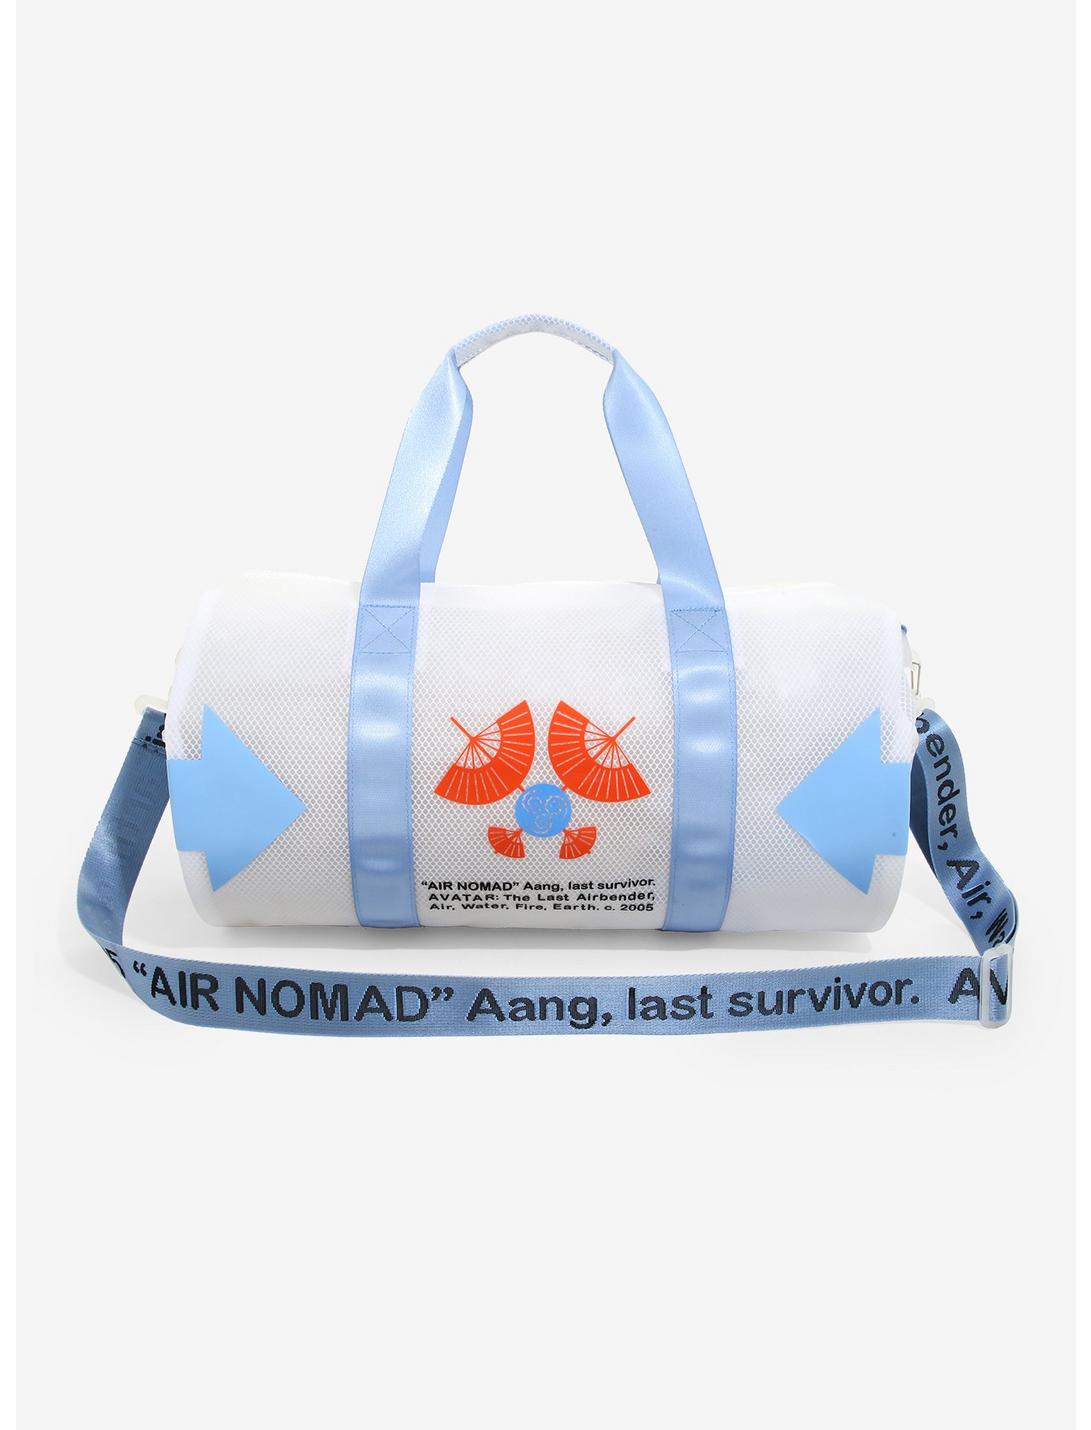 Avatar: The Last Airbender Air Nomad Duffel Bag - BoxLunch Exclusive, , hi-res